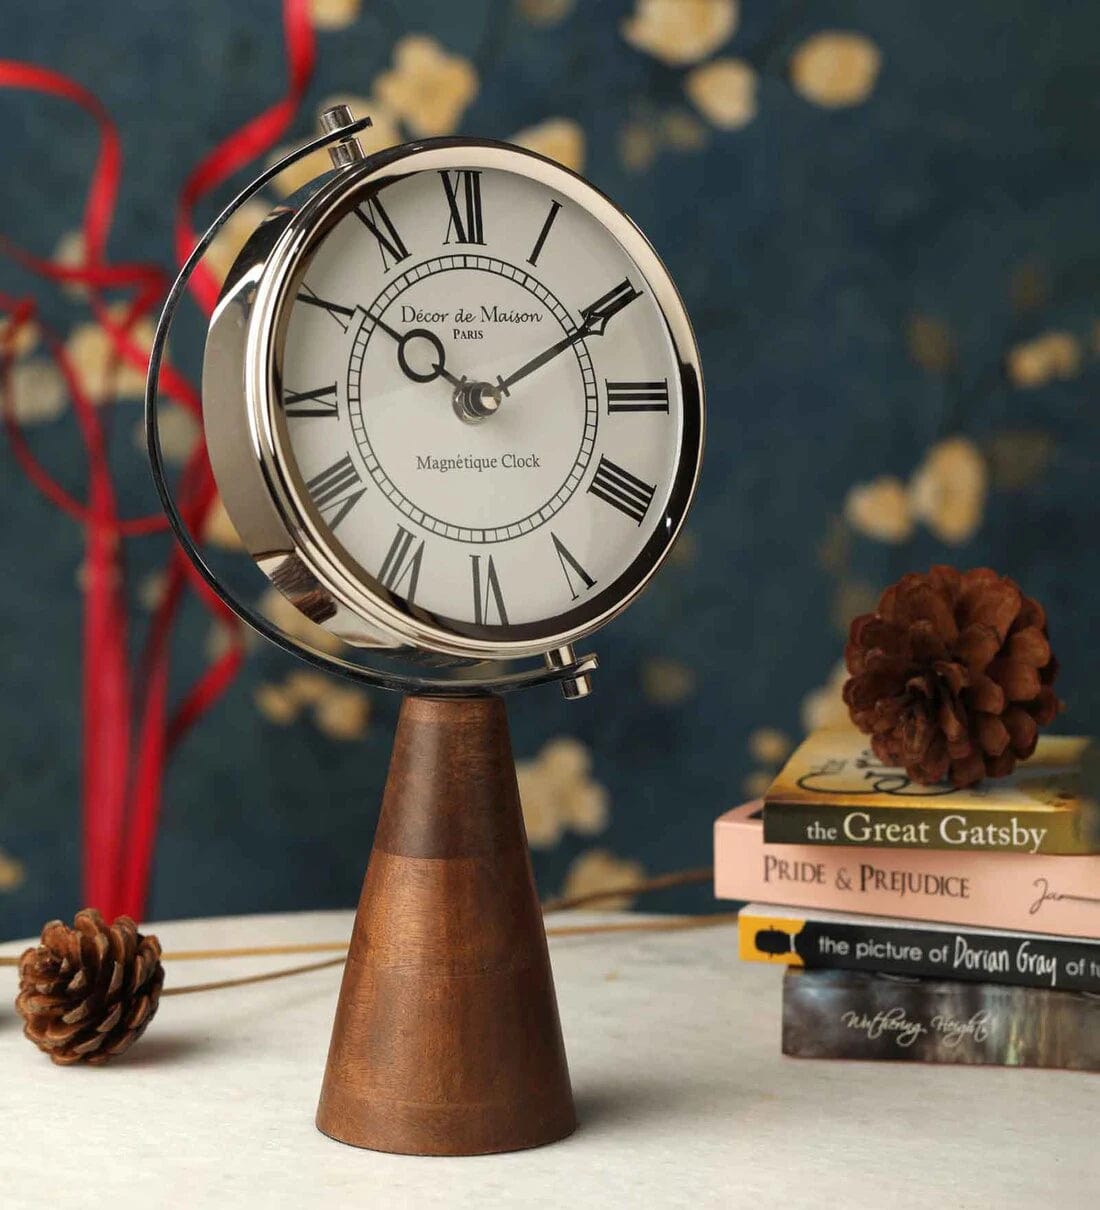 Wood's Pedestal Clock in Reflective Silver